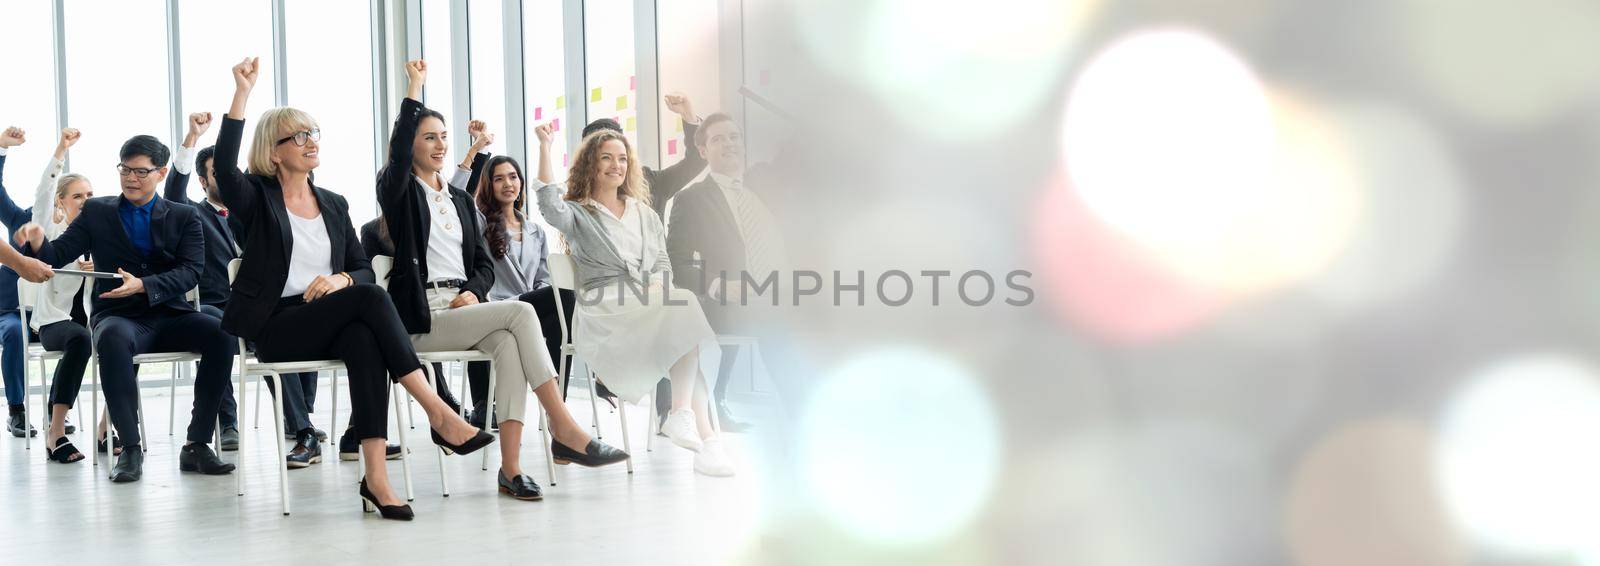 Group of business people meeting in a seminar conference widen view by biancoblue